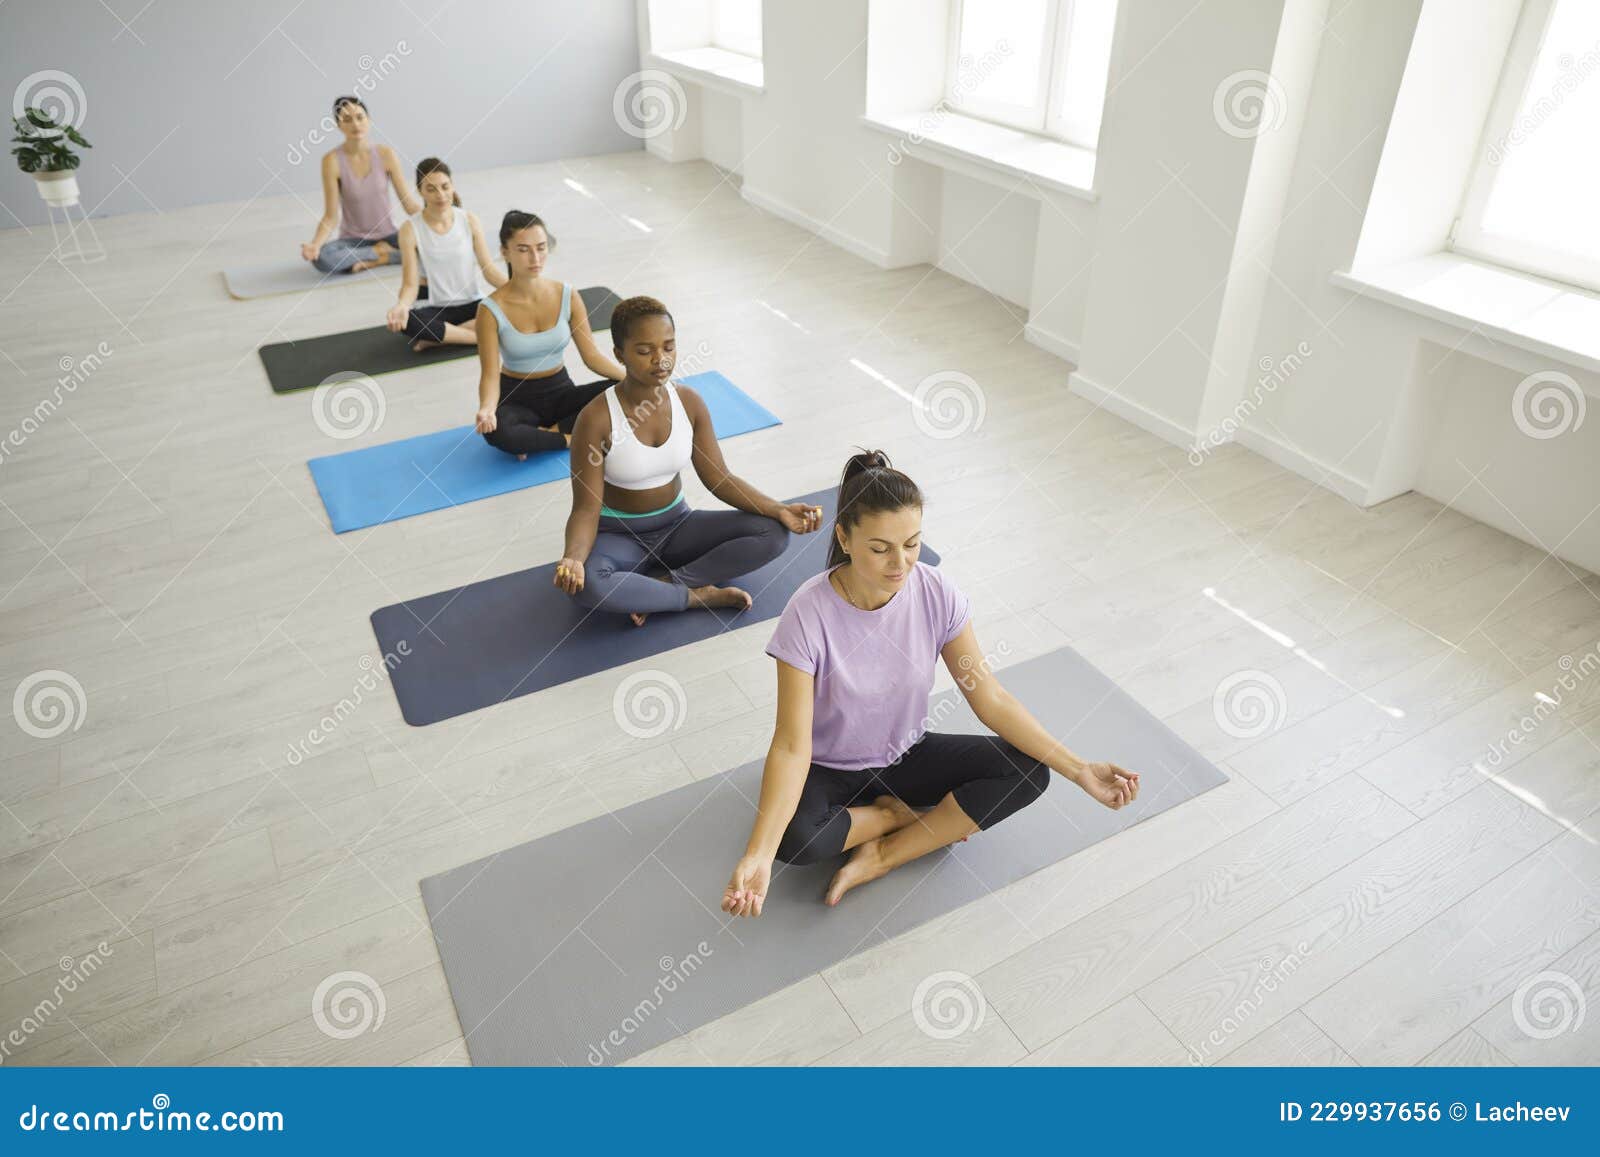 Group of Relaxed Ladies Doing Breathing Exercise and Meditating on Yoga Mats  at Gym Stock Photo - Image of black, fitness: 229937656